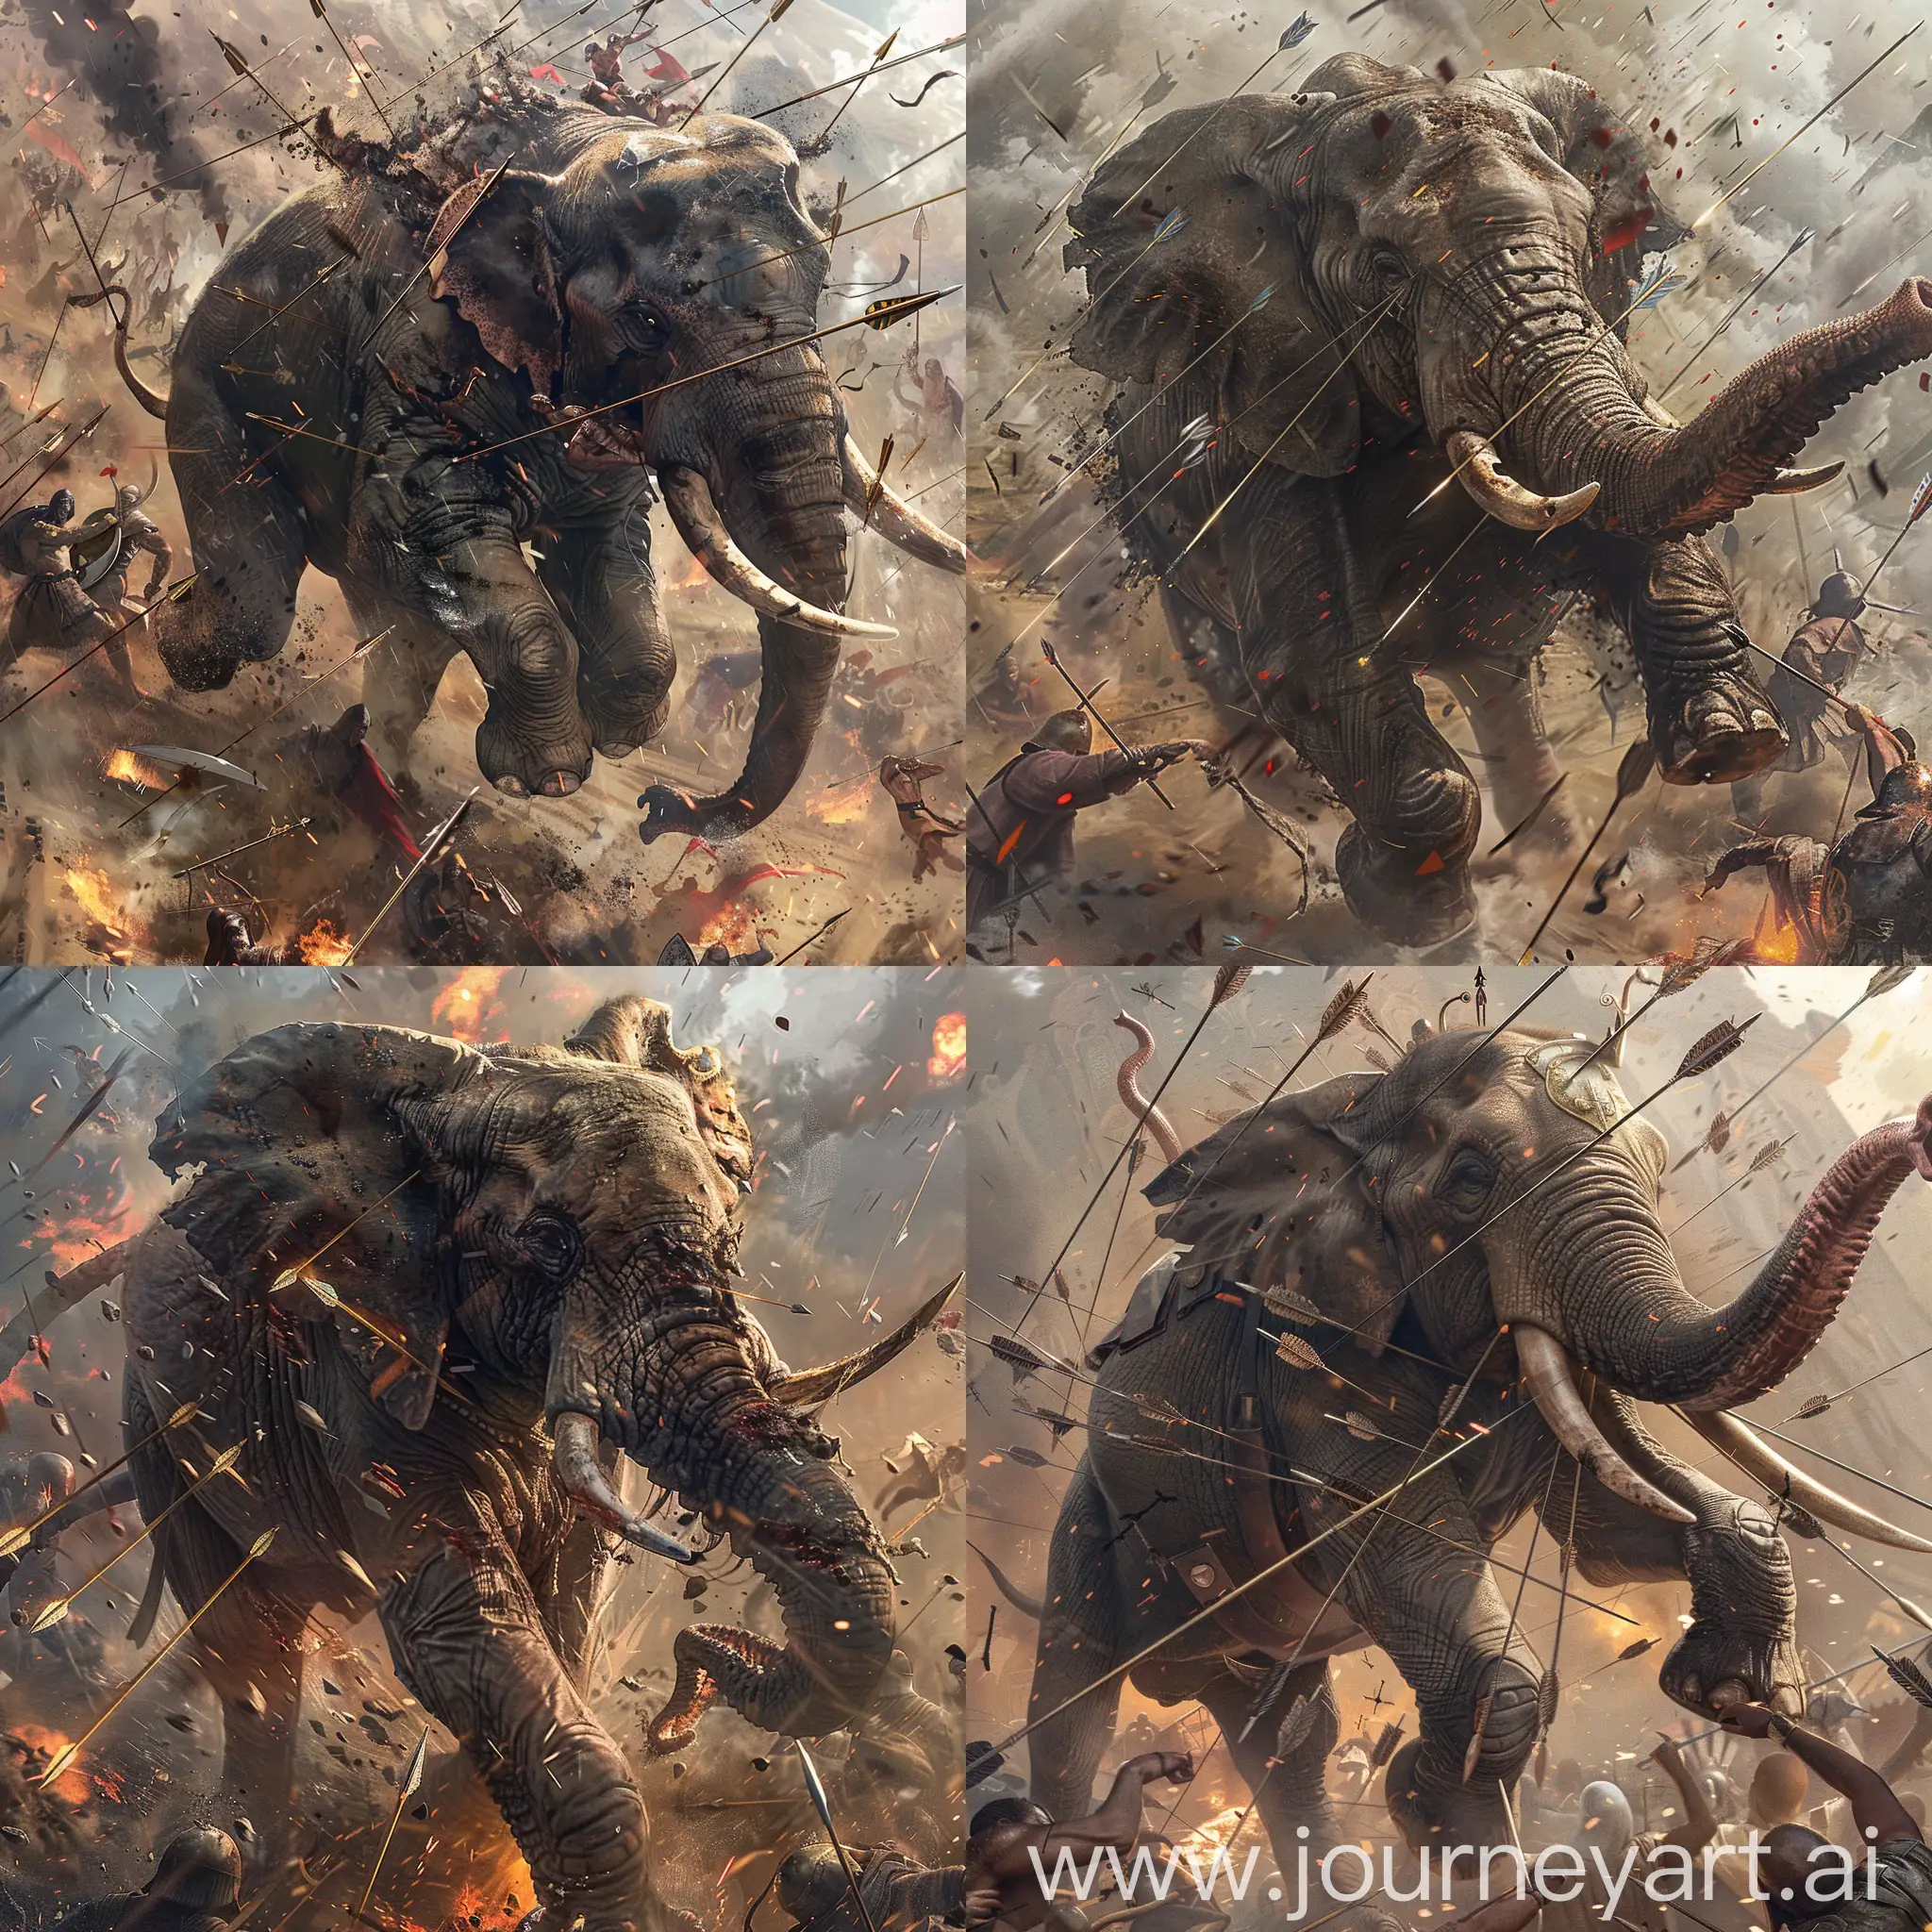  An extremely detailed picture of a war elephant charging through the chaos of an ancient battle. Arrows pierce its armored hide, but it continues to trample enemies underfoot, creating a scene of awe-inspiring terror.